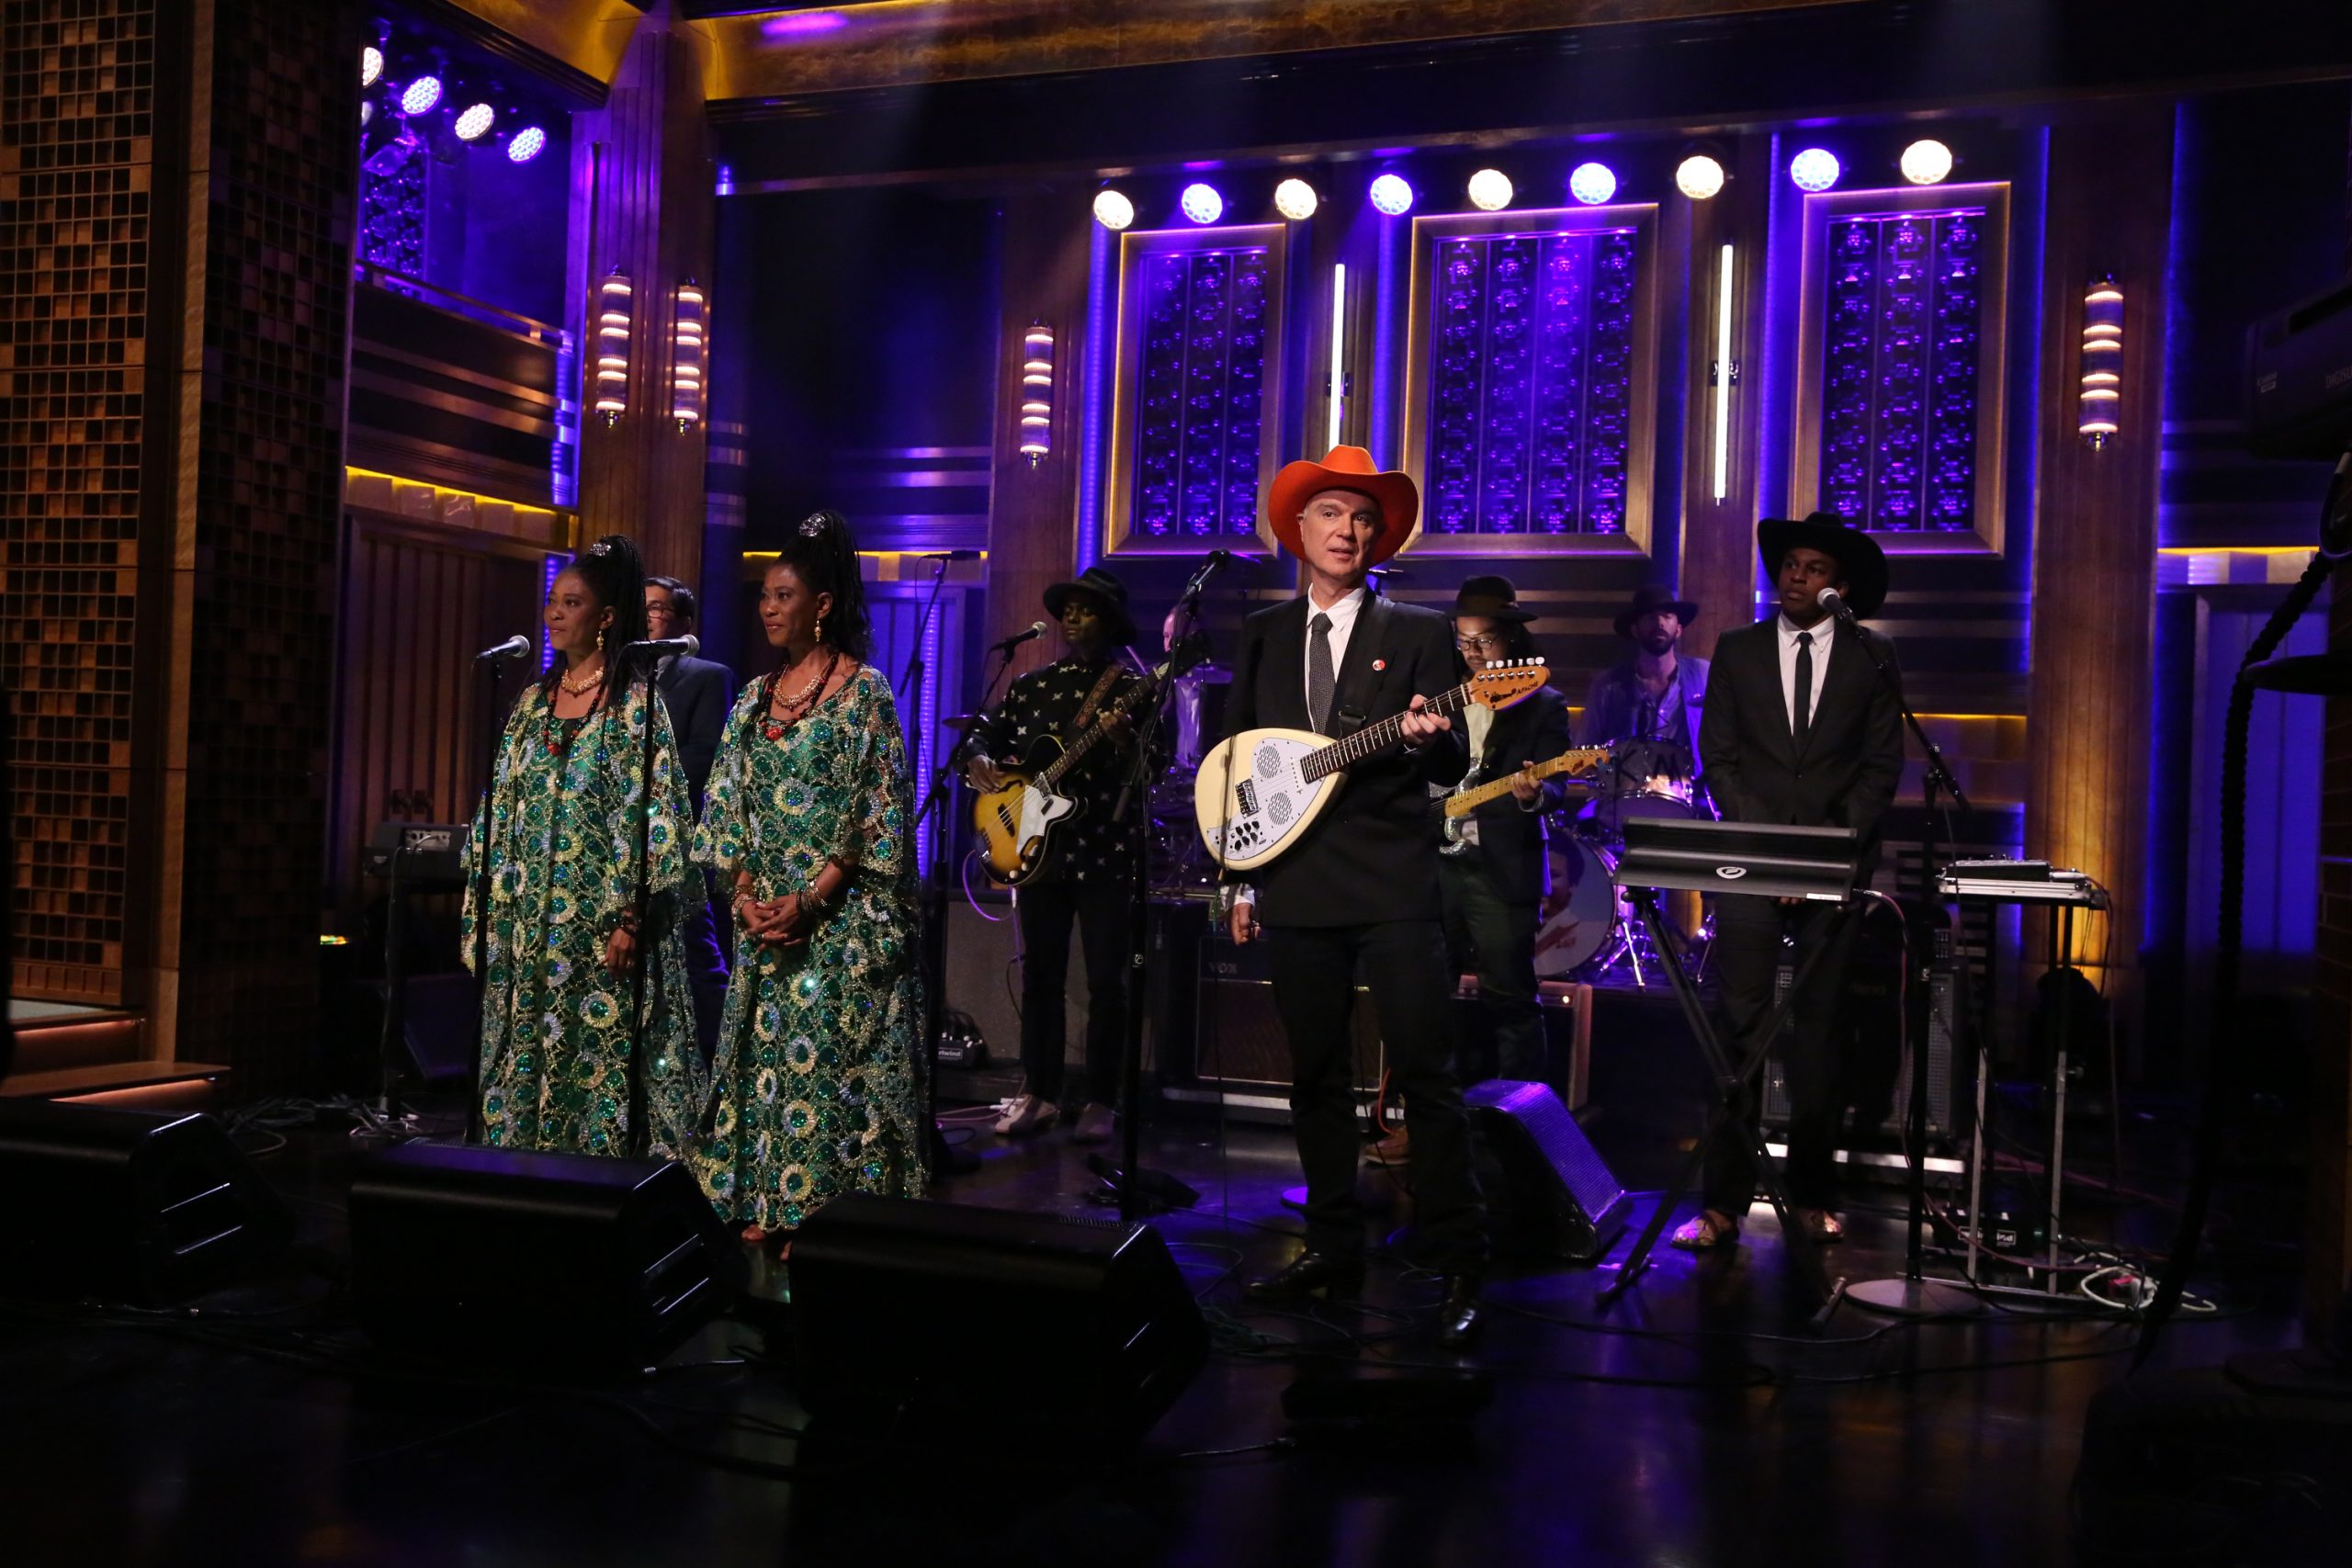 David Byrne Performs William Onyeabor’s “Fantastic Man” With Pat Mahoney and Sinkane on Fallon